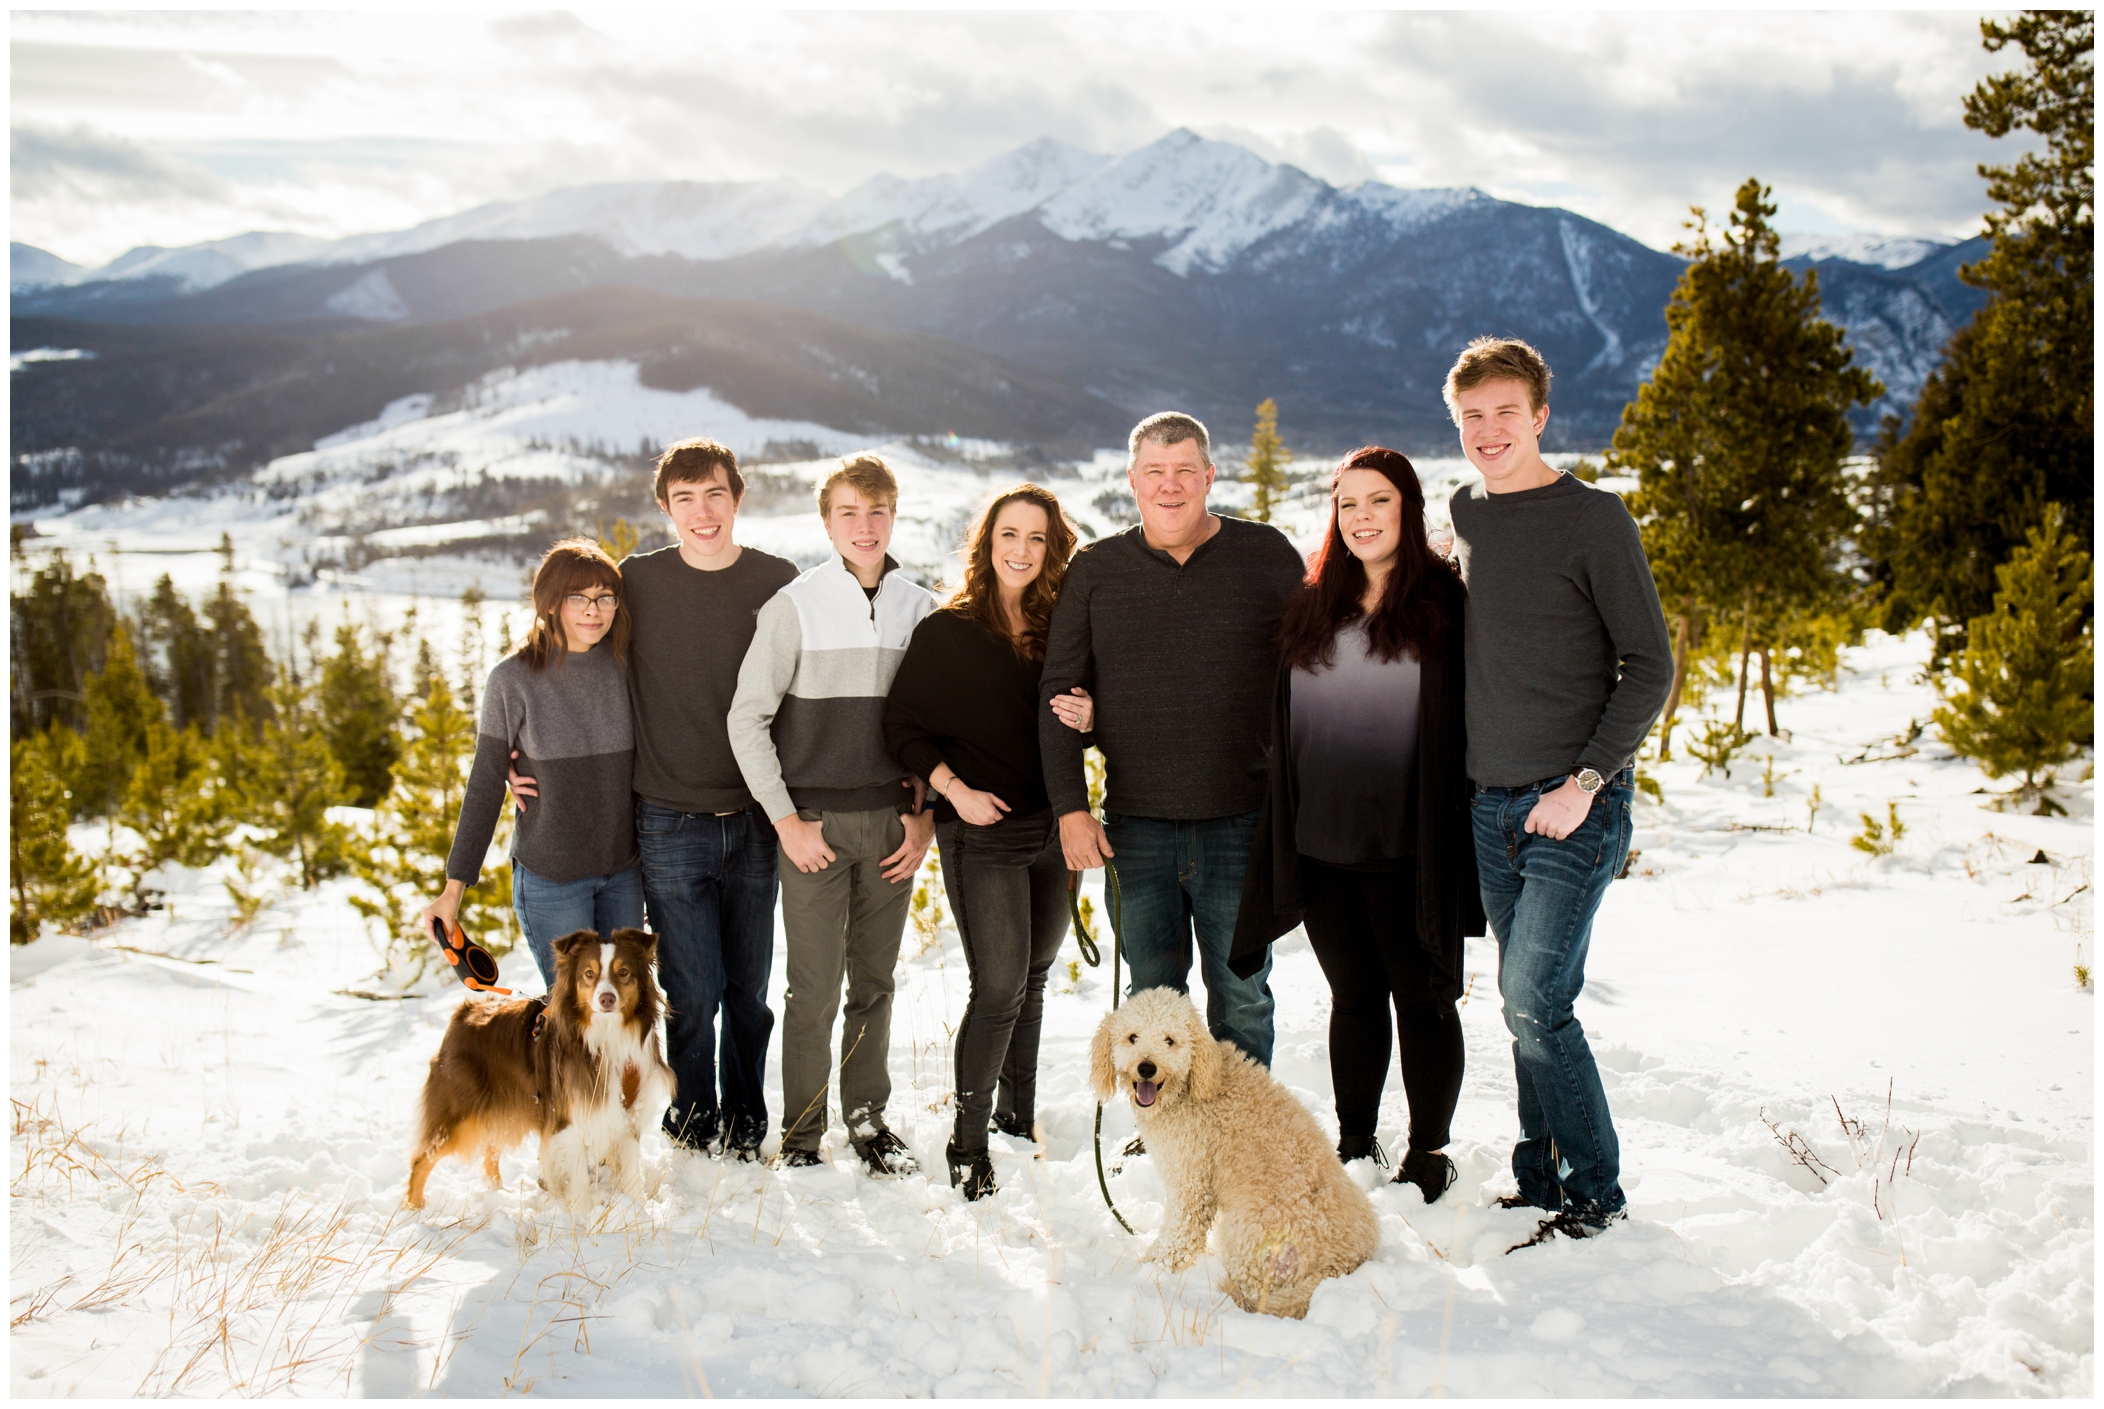 Snowy Colorado winter photos at Sapphire Point by Breckenridge family portrait photographer Plum Pretty Photography 